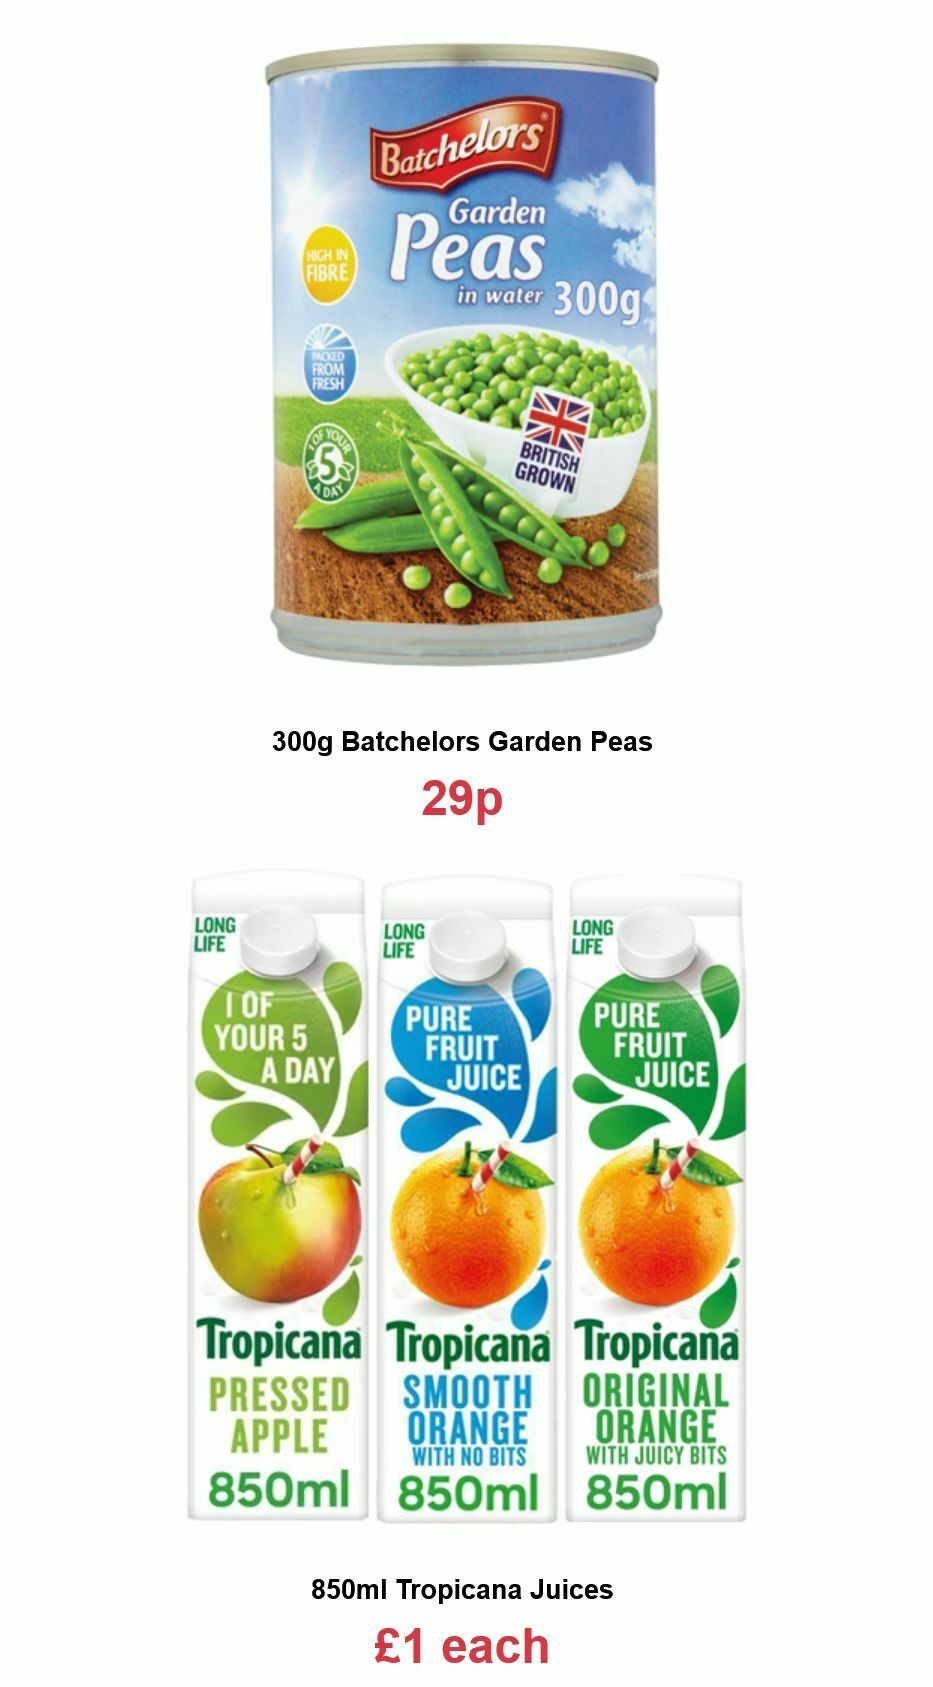 Farmfoods Offers from 9 November